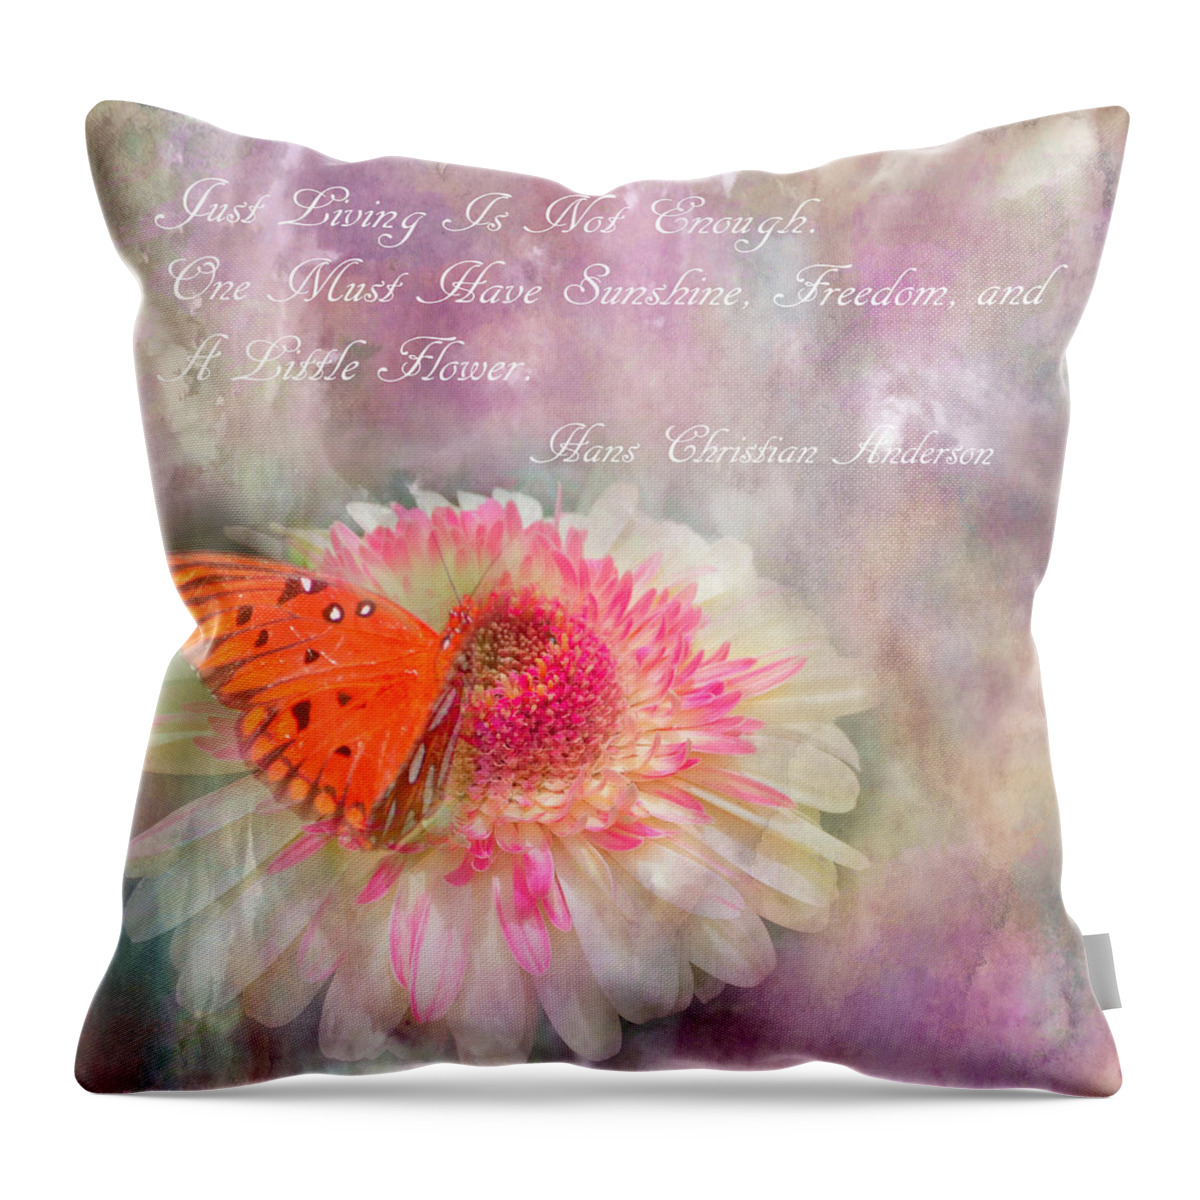 Quote Throw Pillow featuring the photograph Flower Quote by Aimee L Maher ALM GALLERY